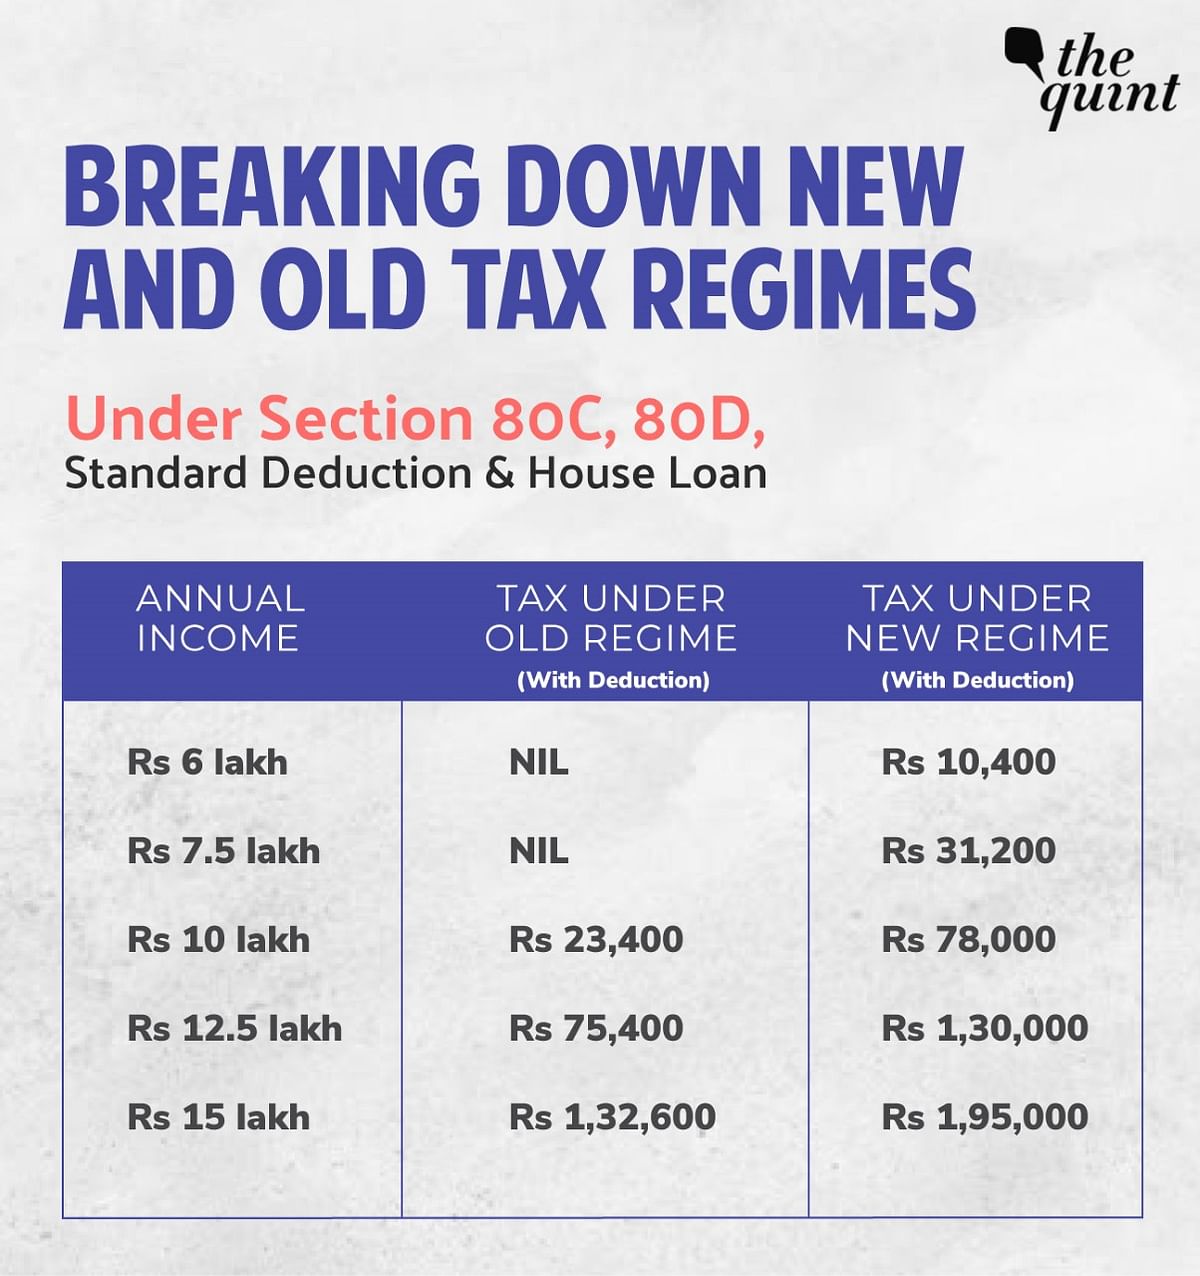 What’s your best bet? To stick with the old regime? Or, to opt for the new one? The Quint crunches the numbers.